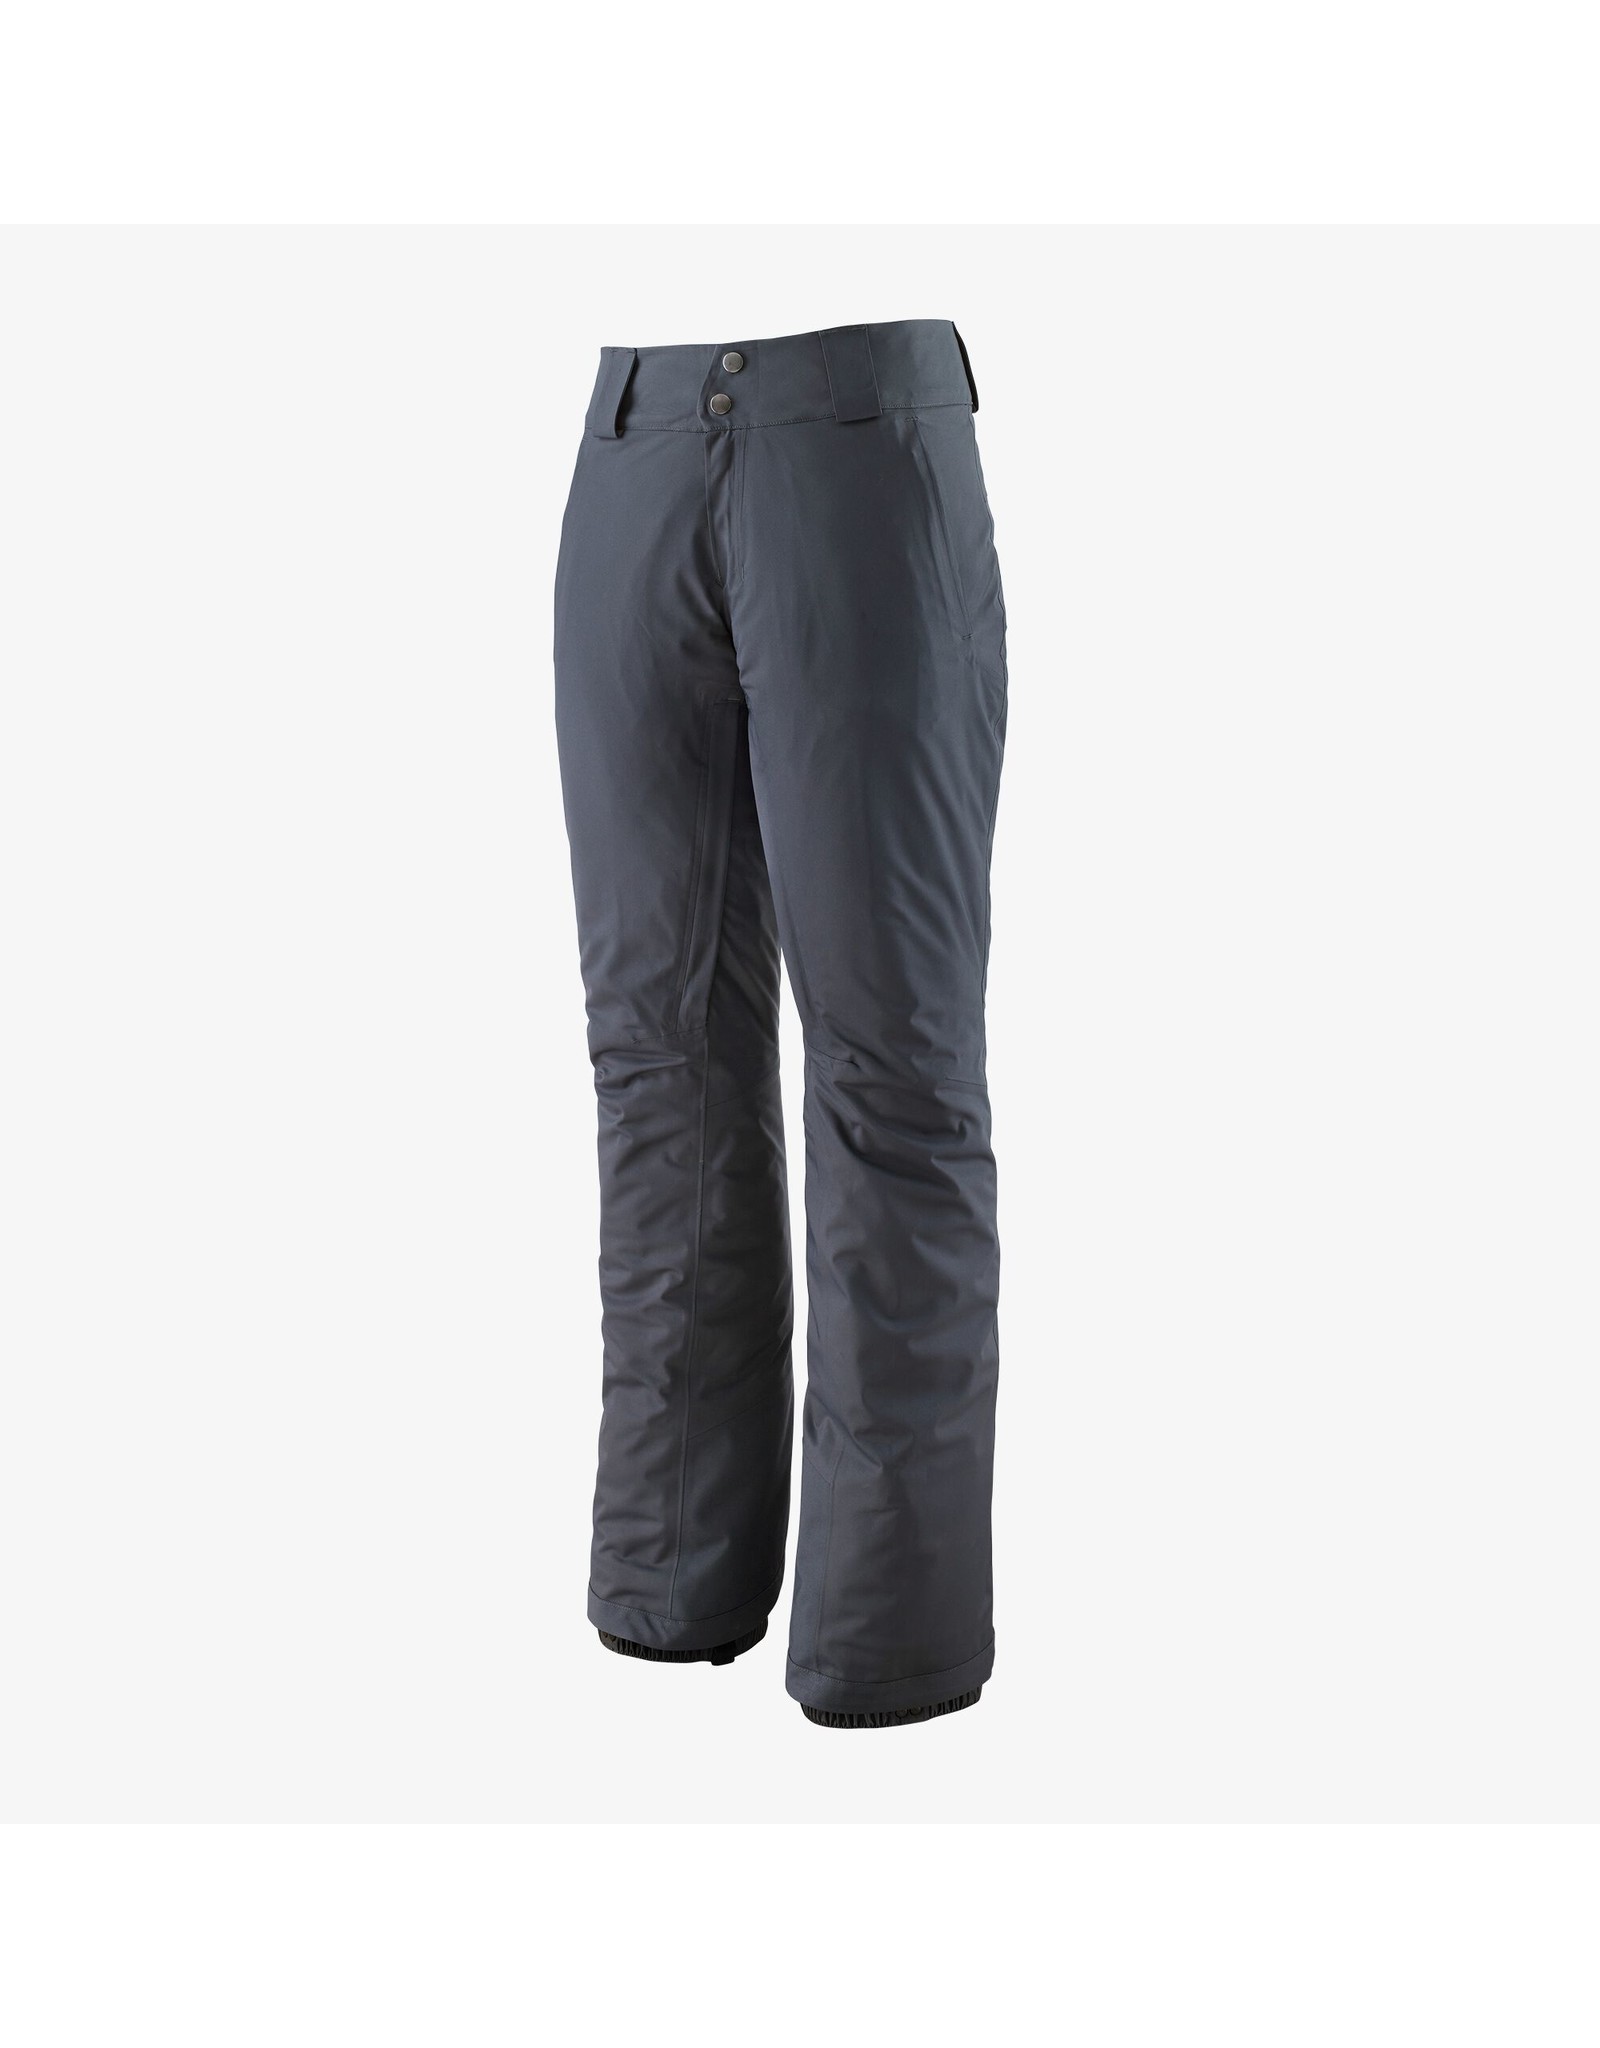 Patagonia Patagonia - W’s Insulated Snowbelle Pants - Reg